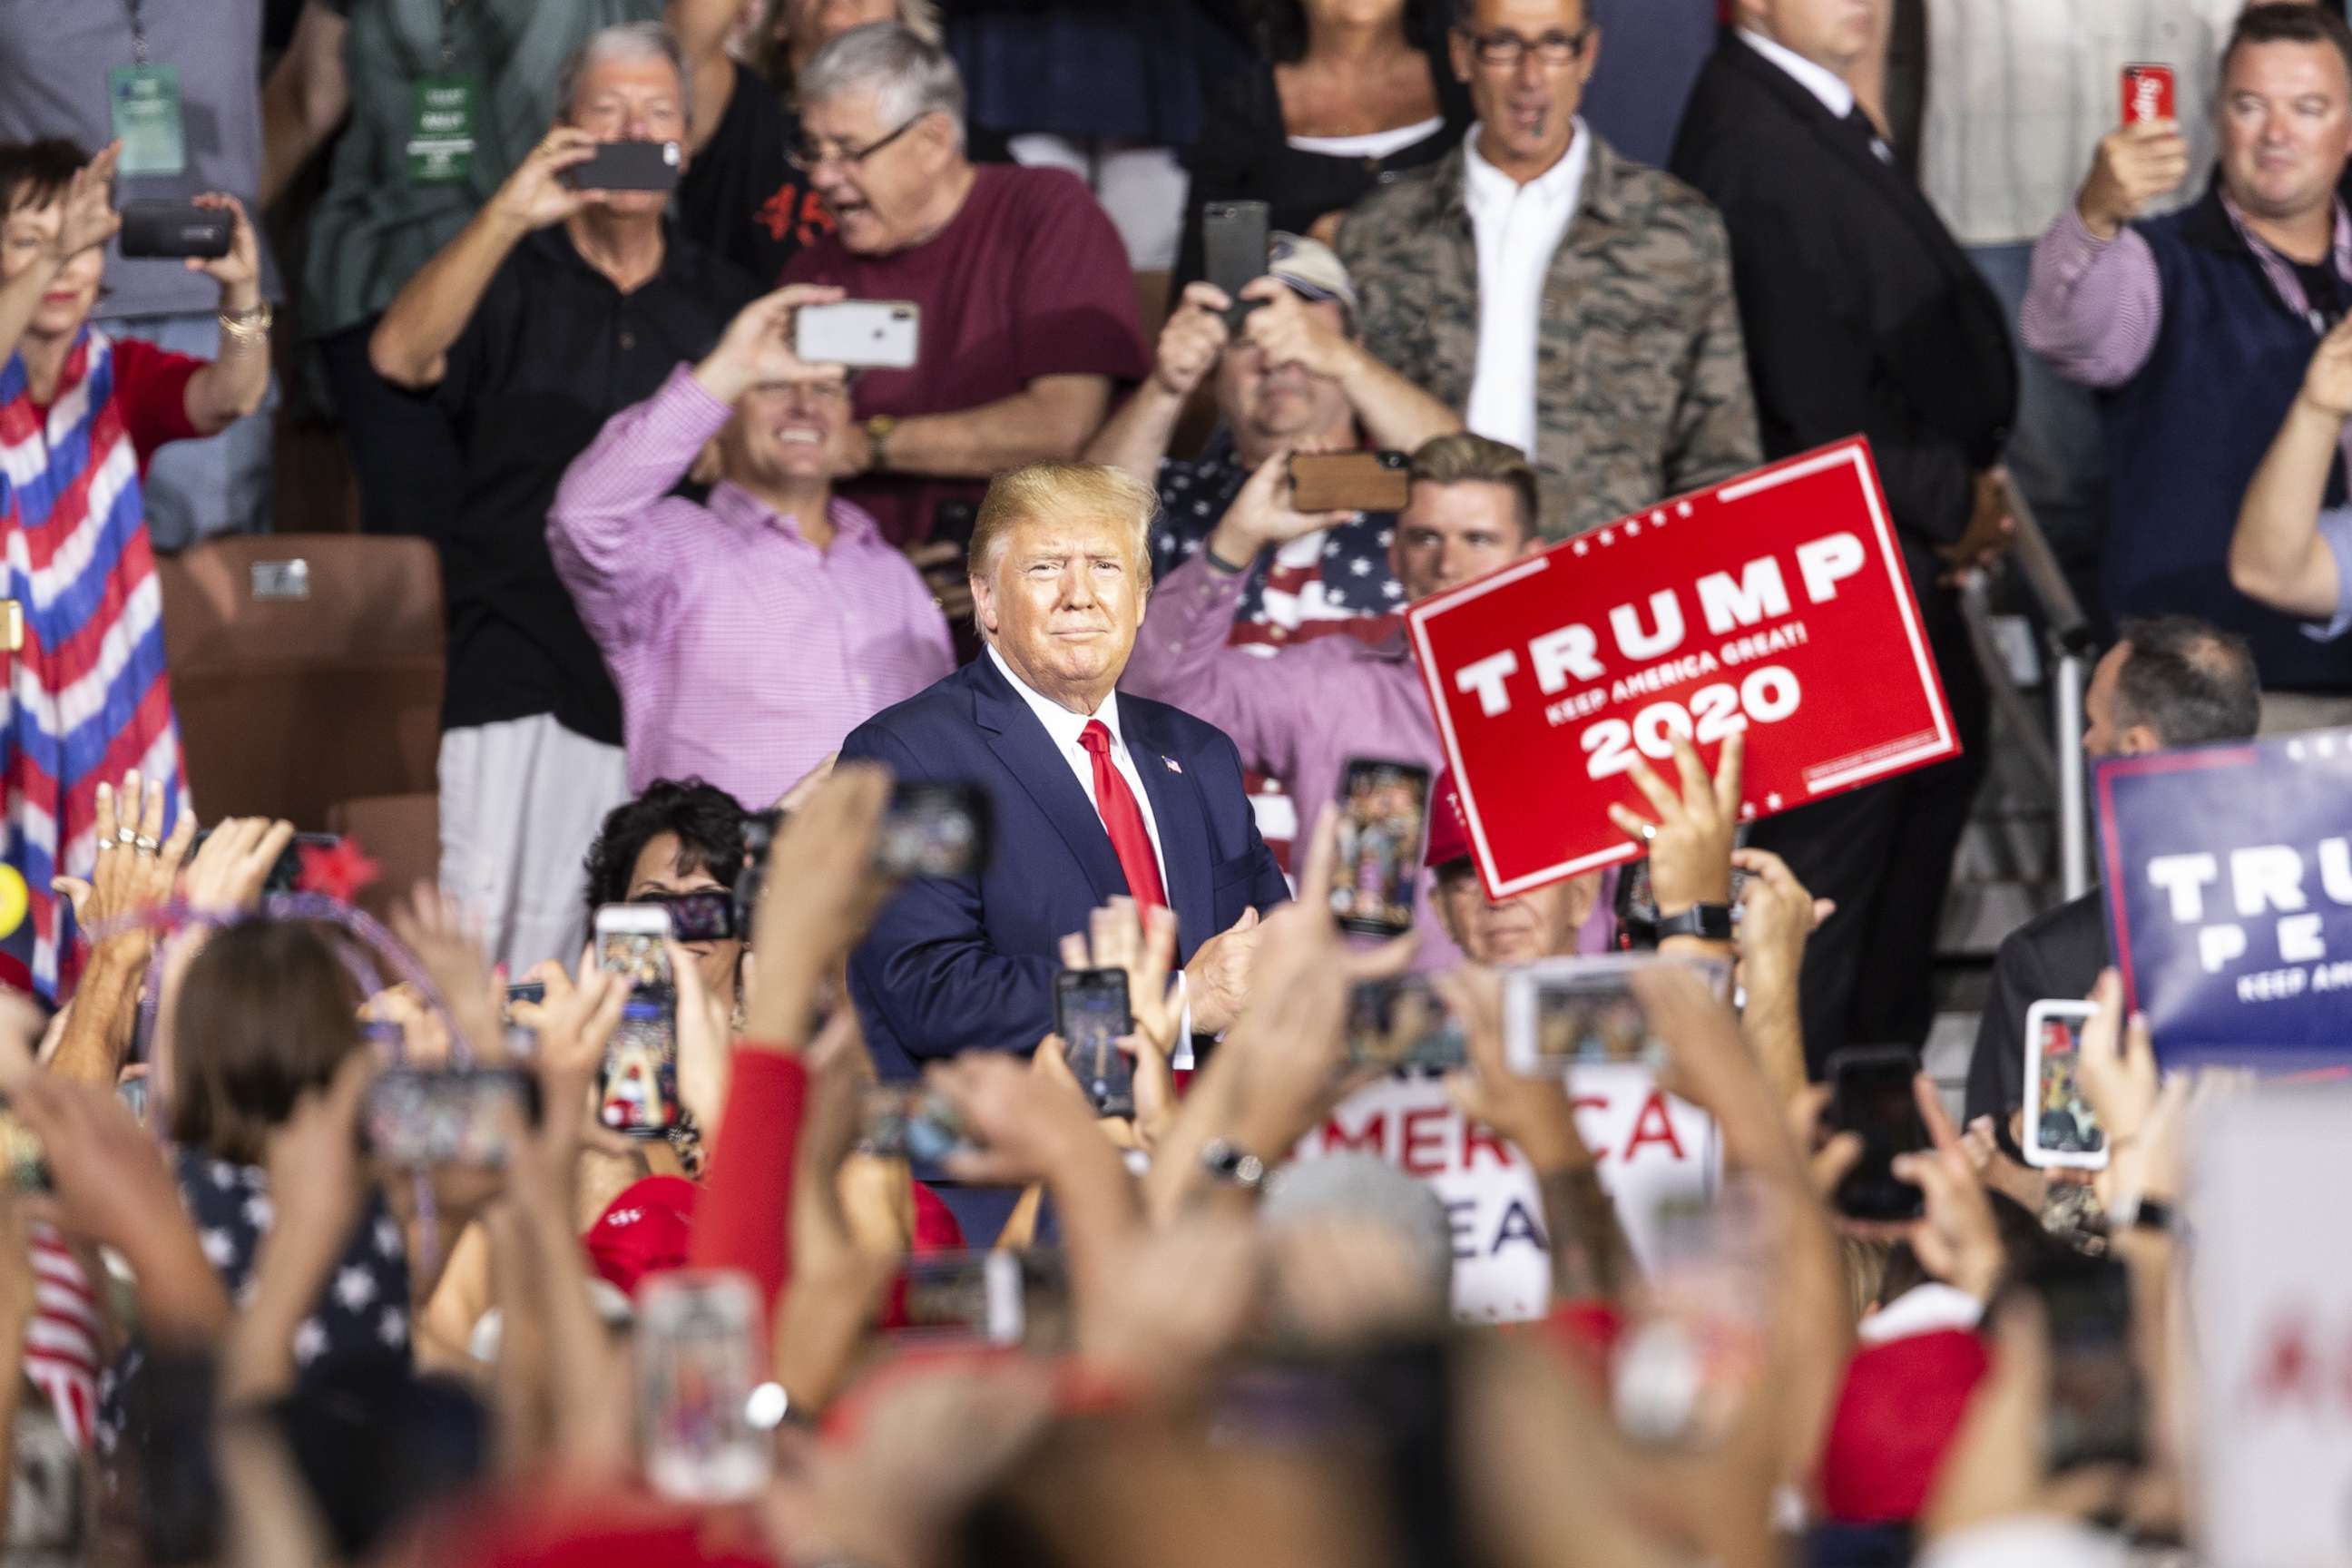 PHOTO: President Donald Trump greets supporters during campaign MAGA (Make America Great Again) rally at Southern New Hampshire University Arena, in Manchester, N.H. on Aug. 15, 2019.